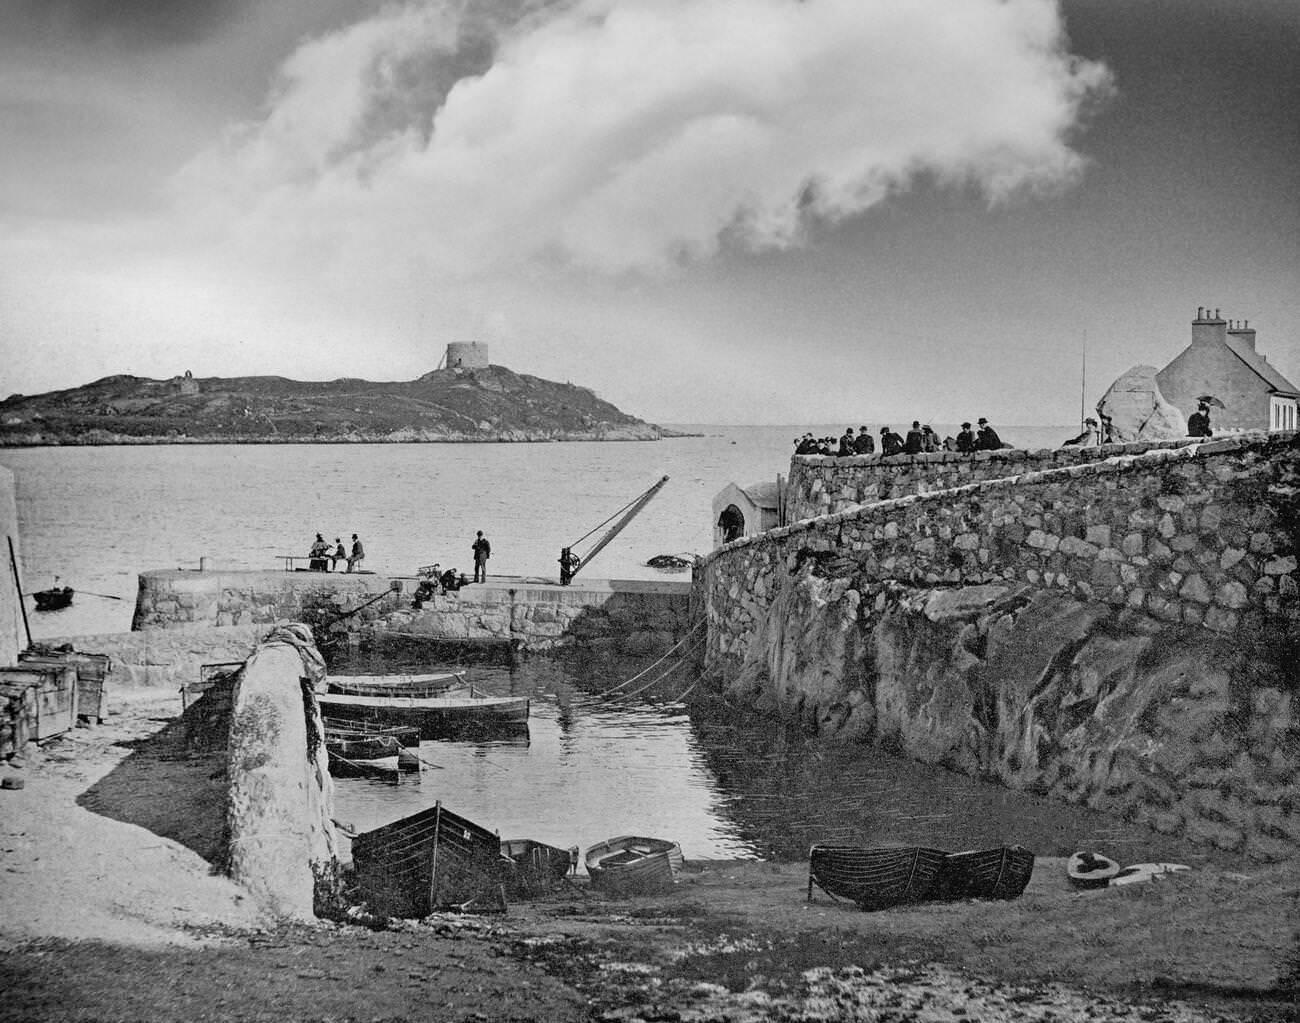 Voliemore Harbour, also known historically as Dalkey Harbour.